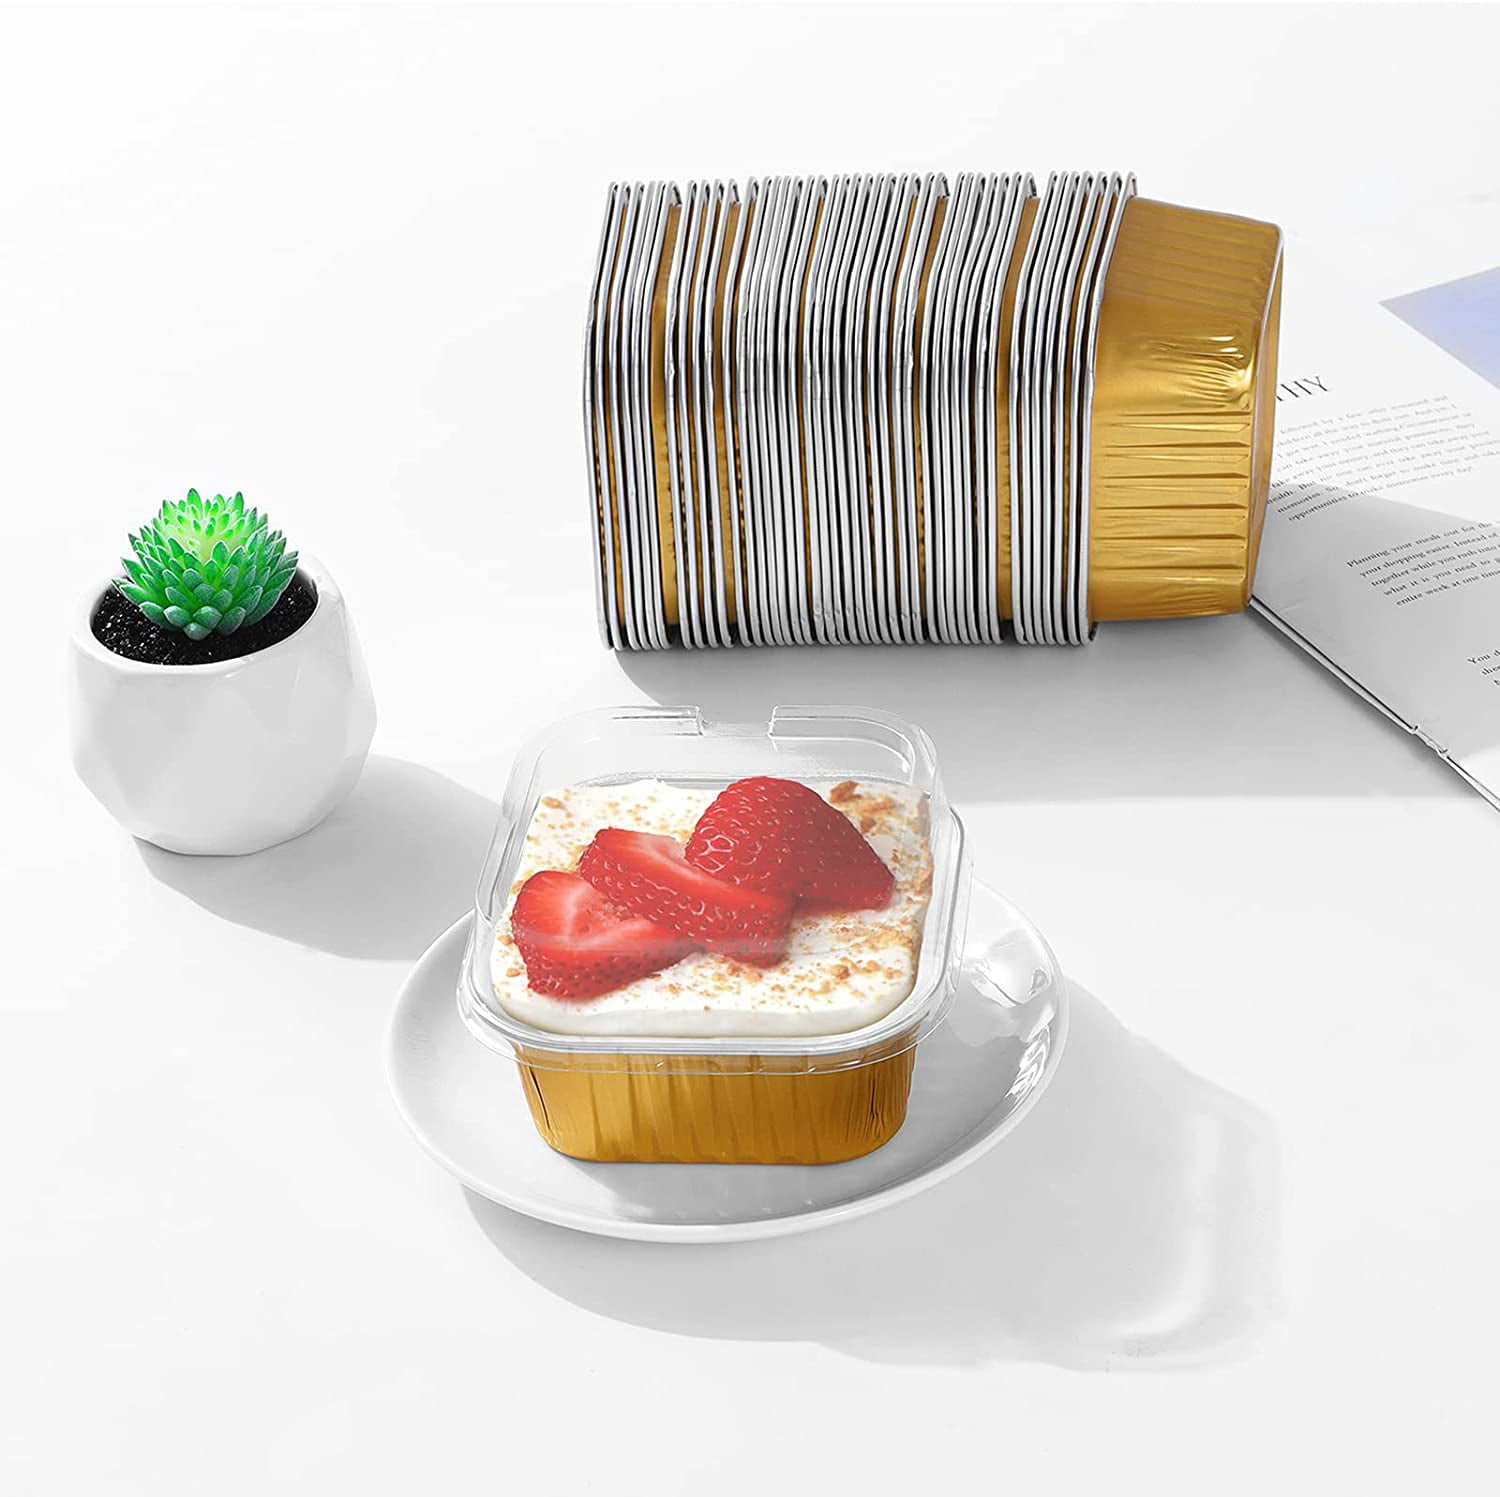 Lotfancy Aluminum Foil Cupcake Baking Cups with Lids and Spoons, 5oz/125ml, 50 Pack Disposable Creme Brulee Ramekins, Oven Safe Mini Cake Tins